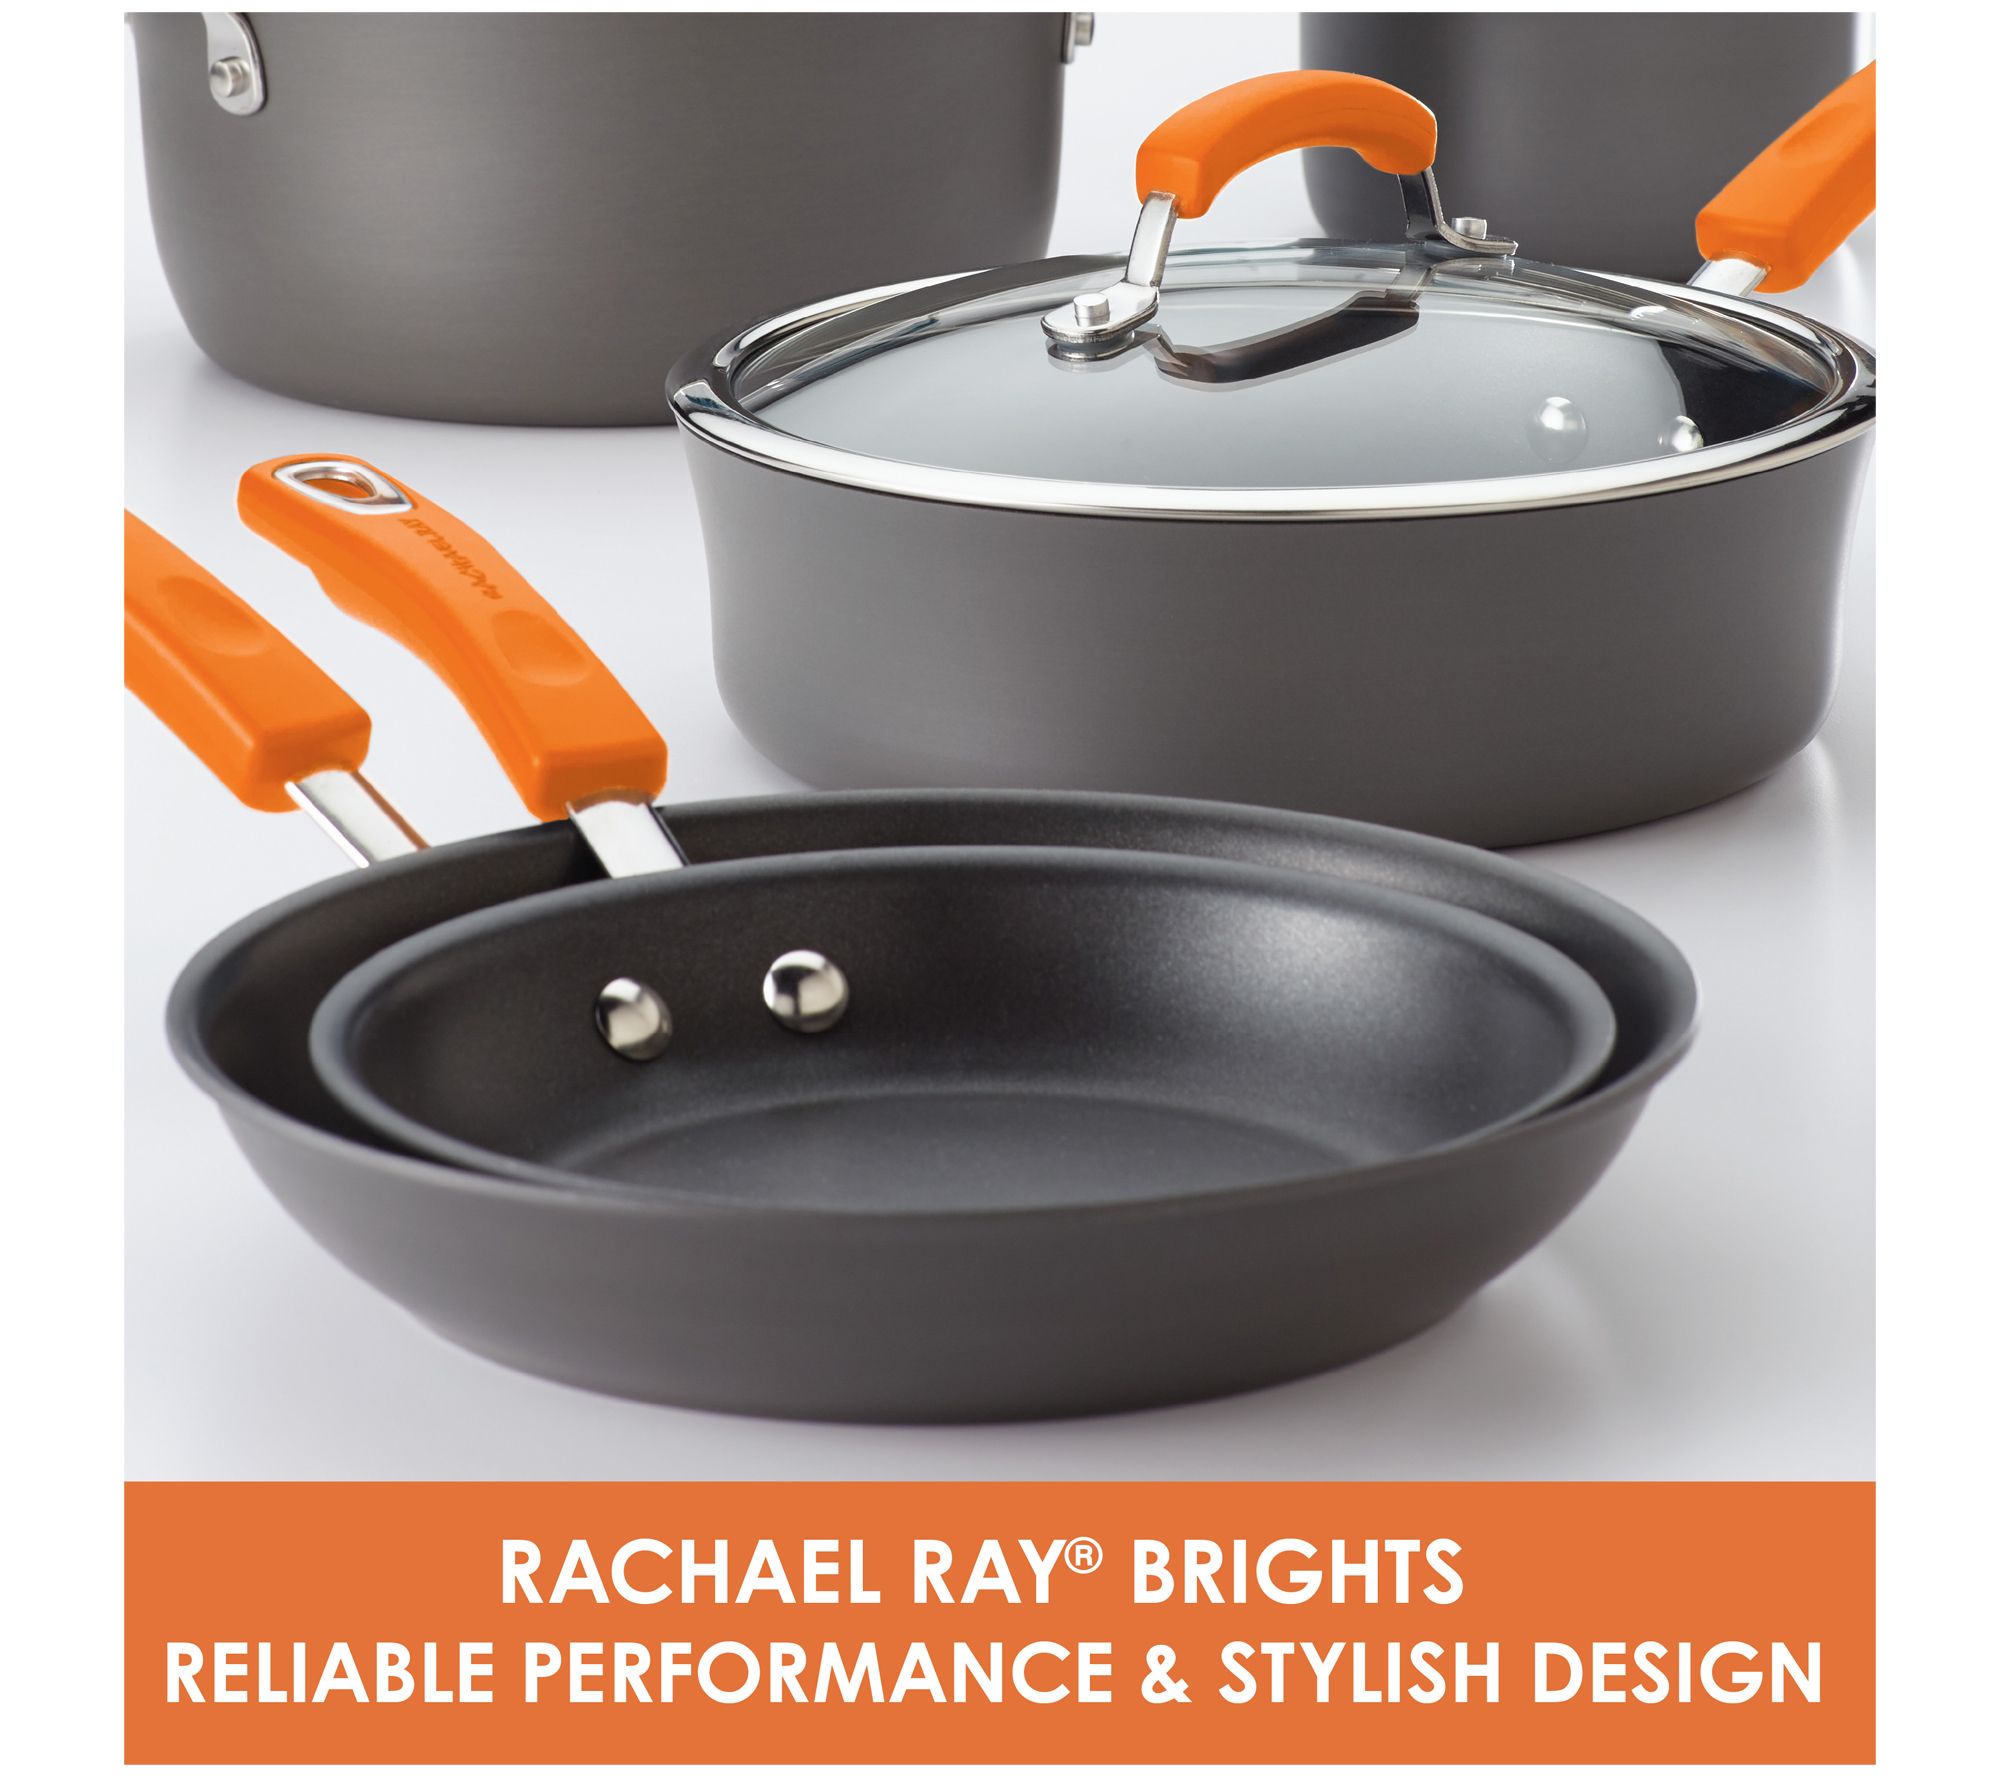 Rachael Ray Hard Anodized Nonstick 8-Quart Oval Pasta Pot with Glass Lid,  Orange